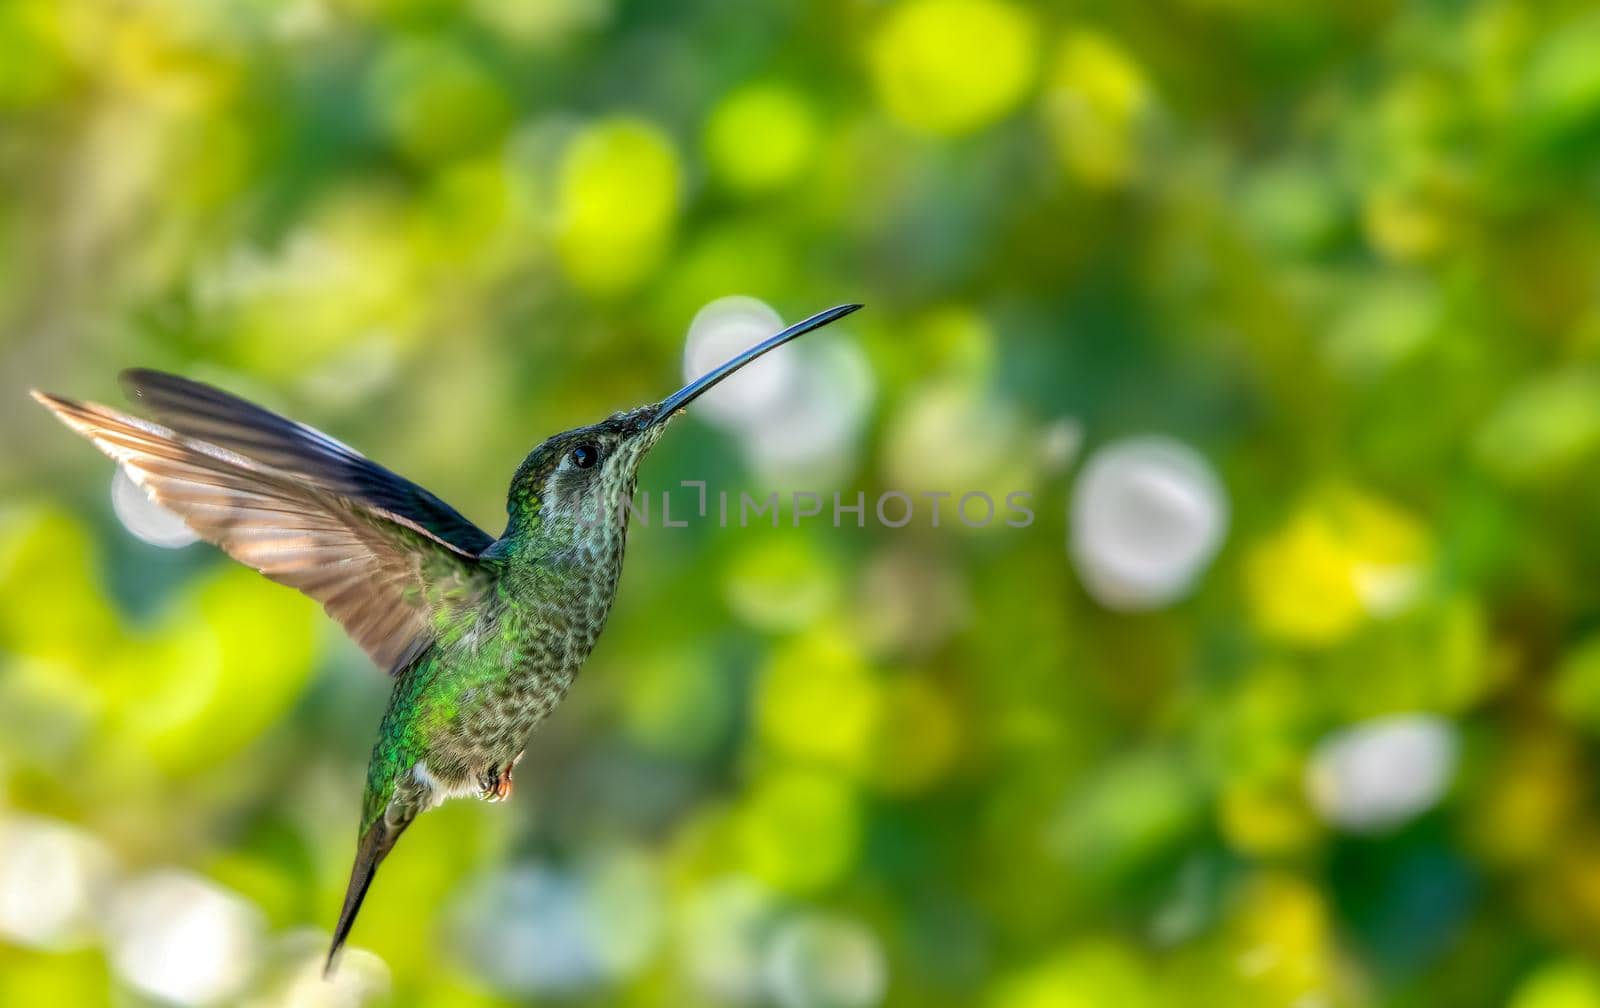 Flying Talamanca hummingbird (Eugenes spectabilis) or admirable hummingbird against blurry background with space for text. San Gerardo de Dota, Wildlife and birdwatching in Costa Rica.